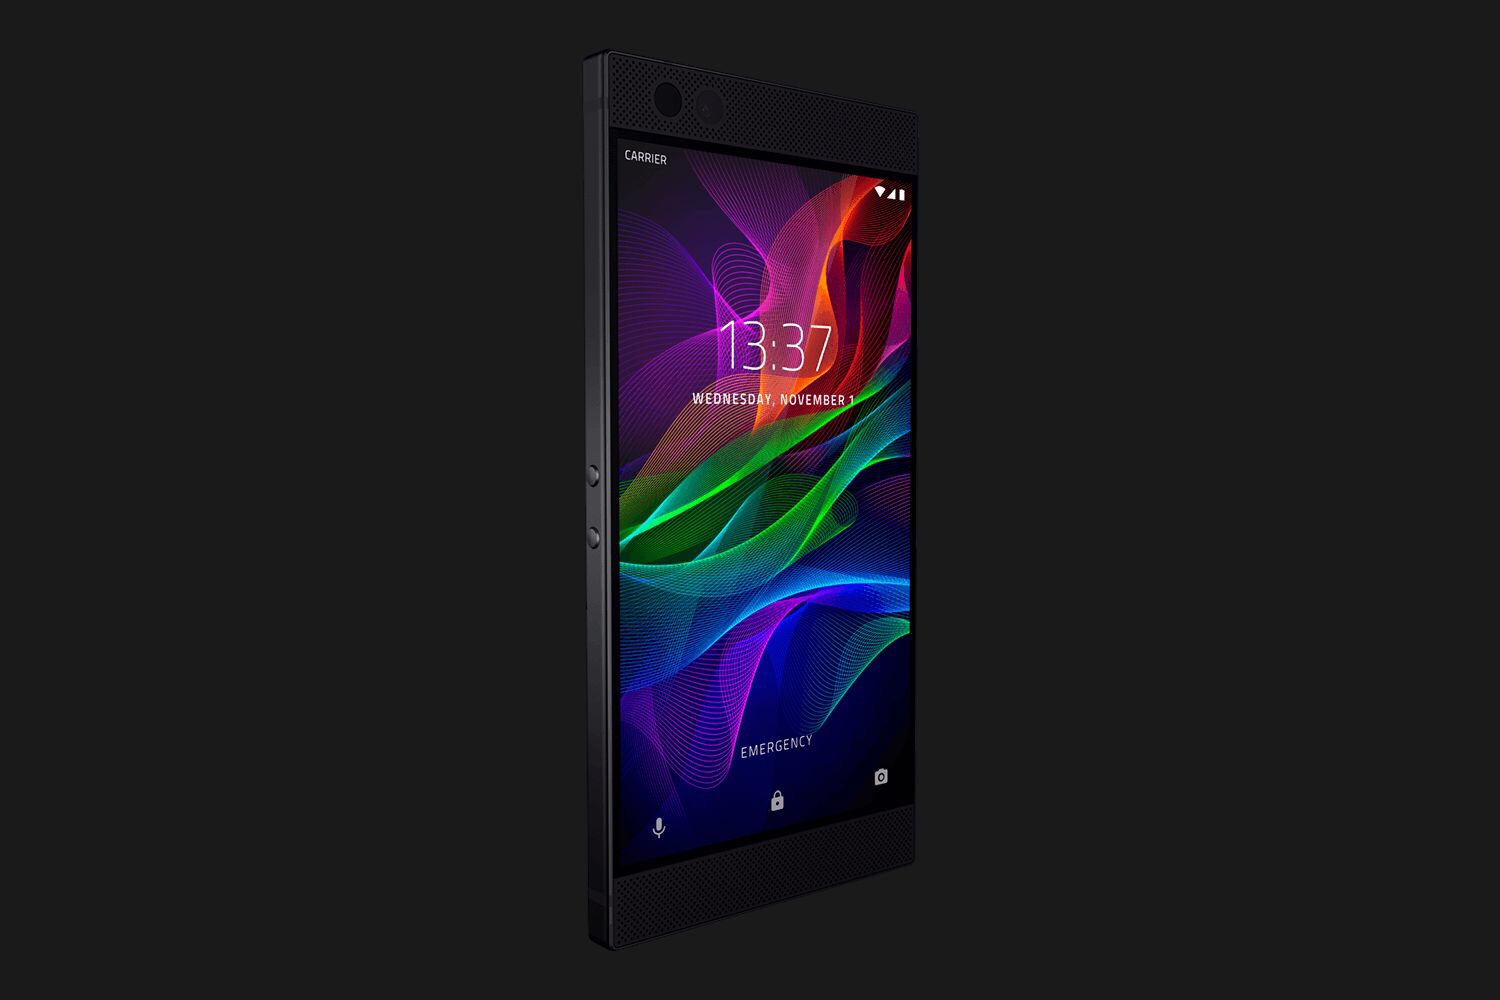 Netflix is bringing HDR and surround sound support to the Razer Phone